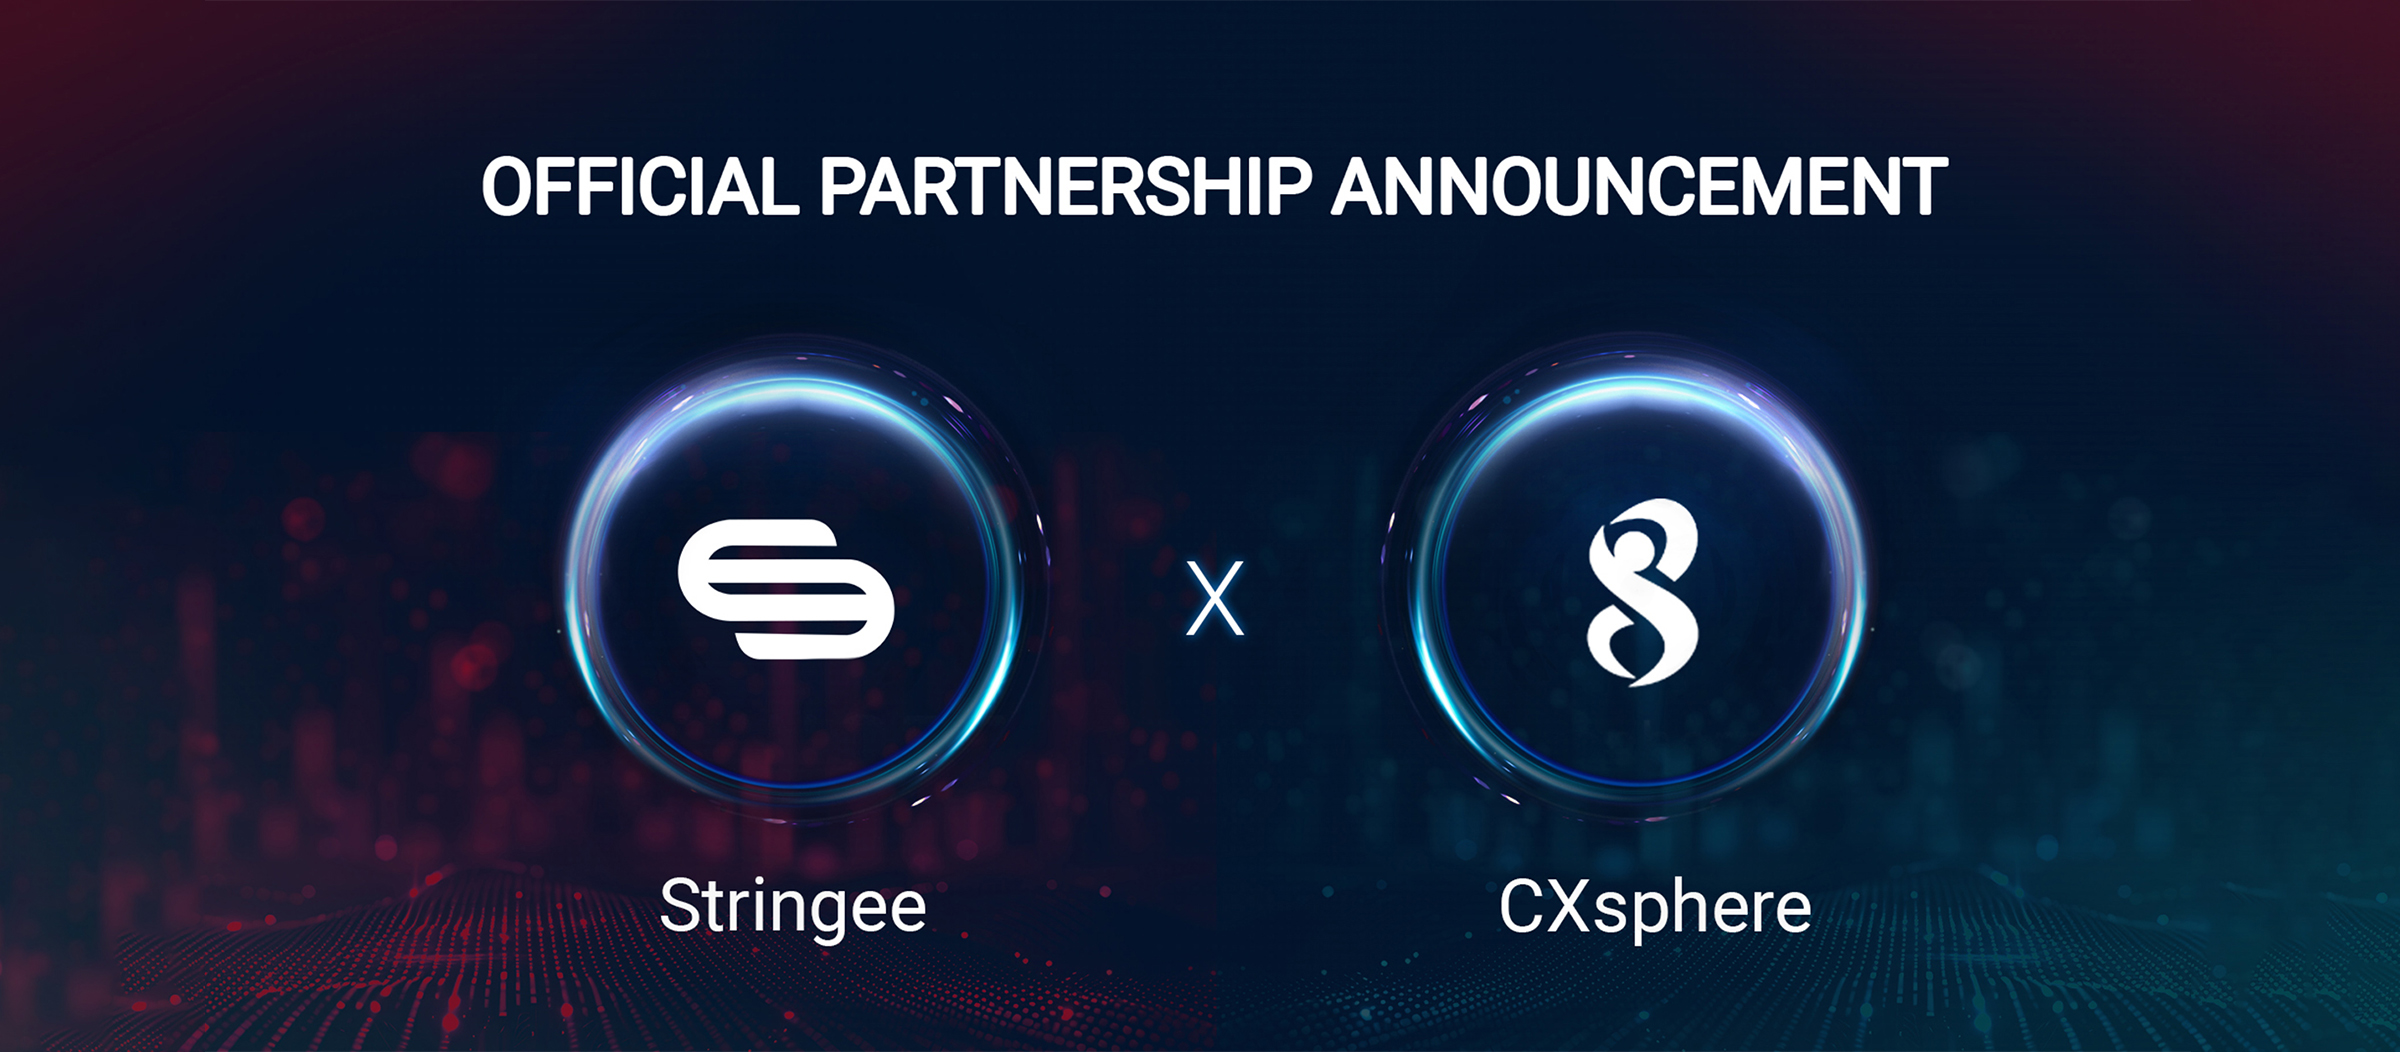 Announcing the Strategic Partnership between Stringee and CXsphere